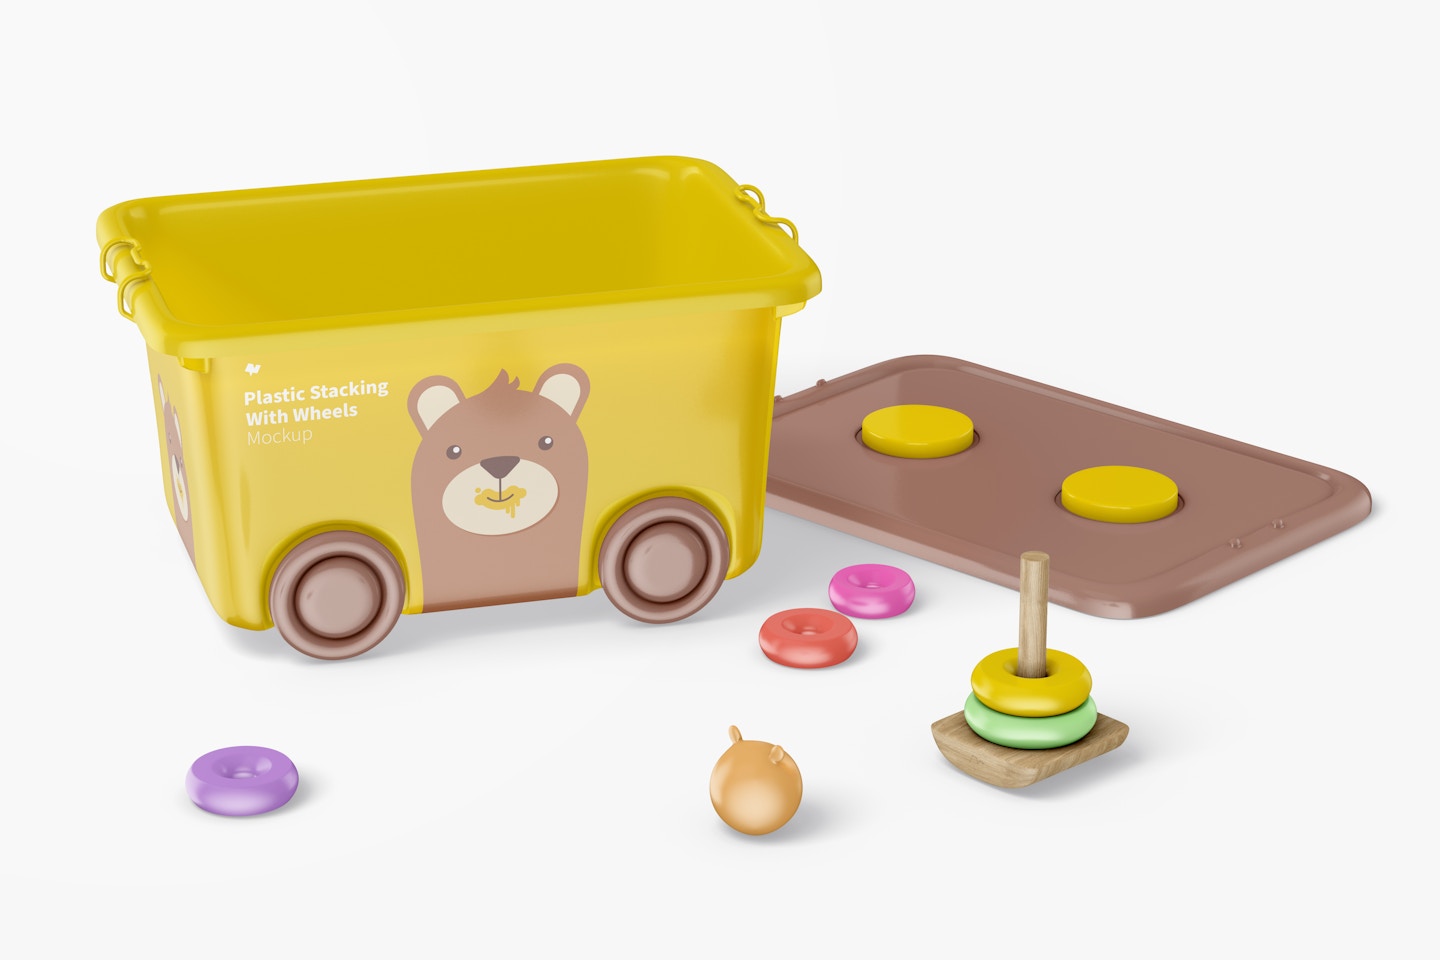 Plastic Stacking Bin with Wheels and Toys Mockup